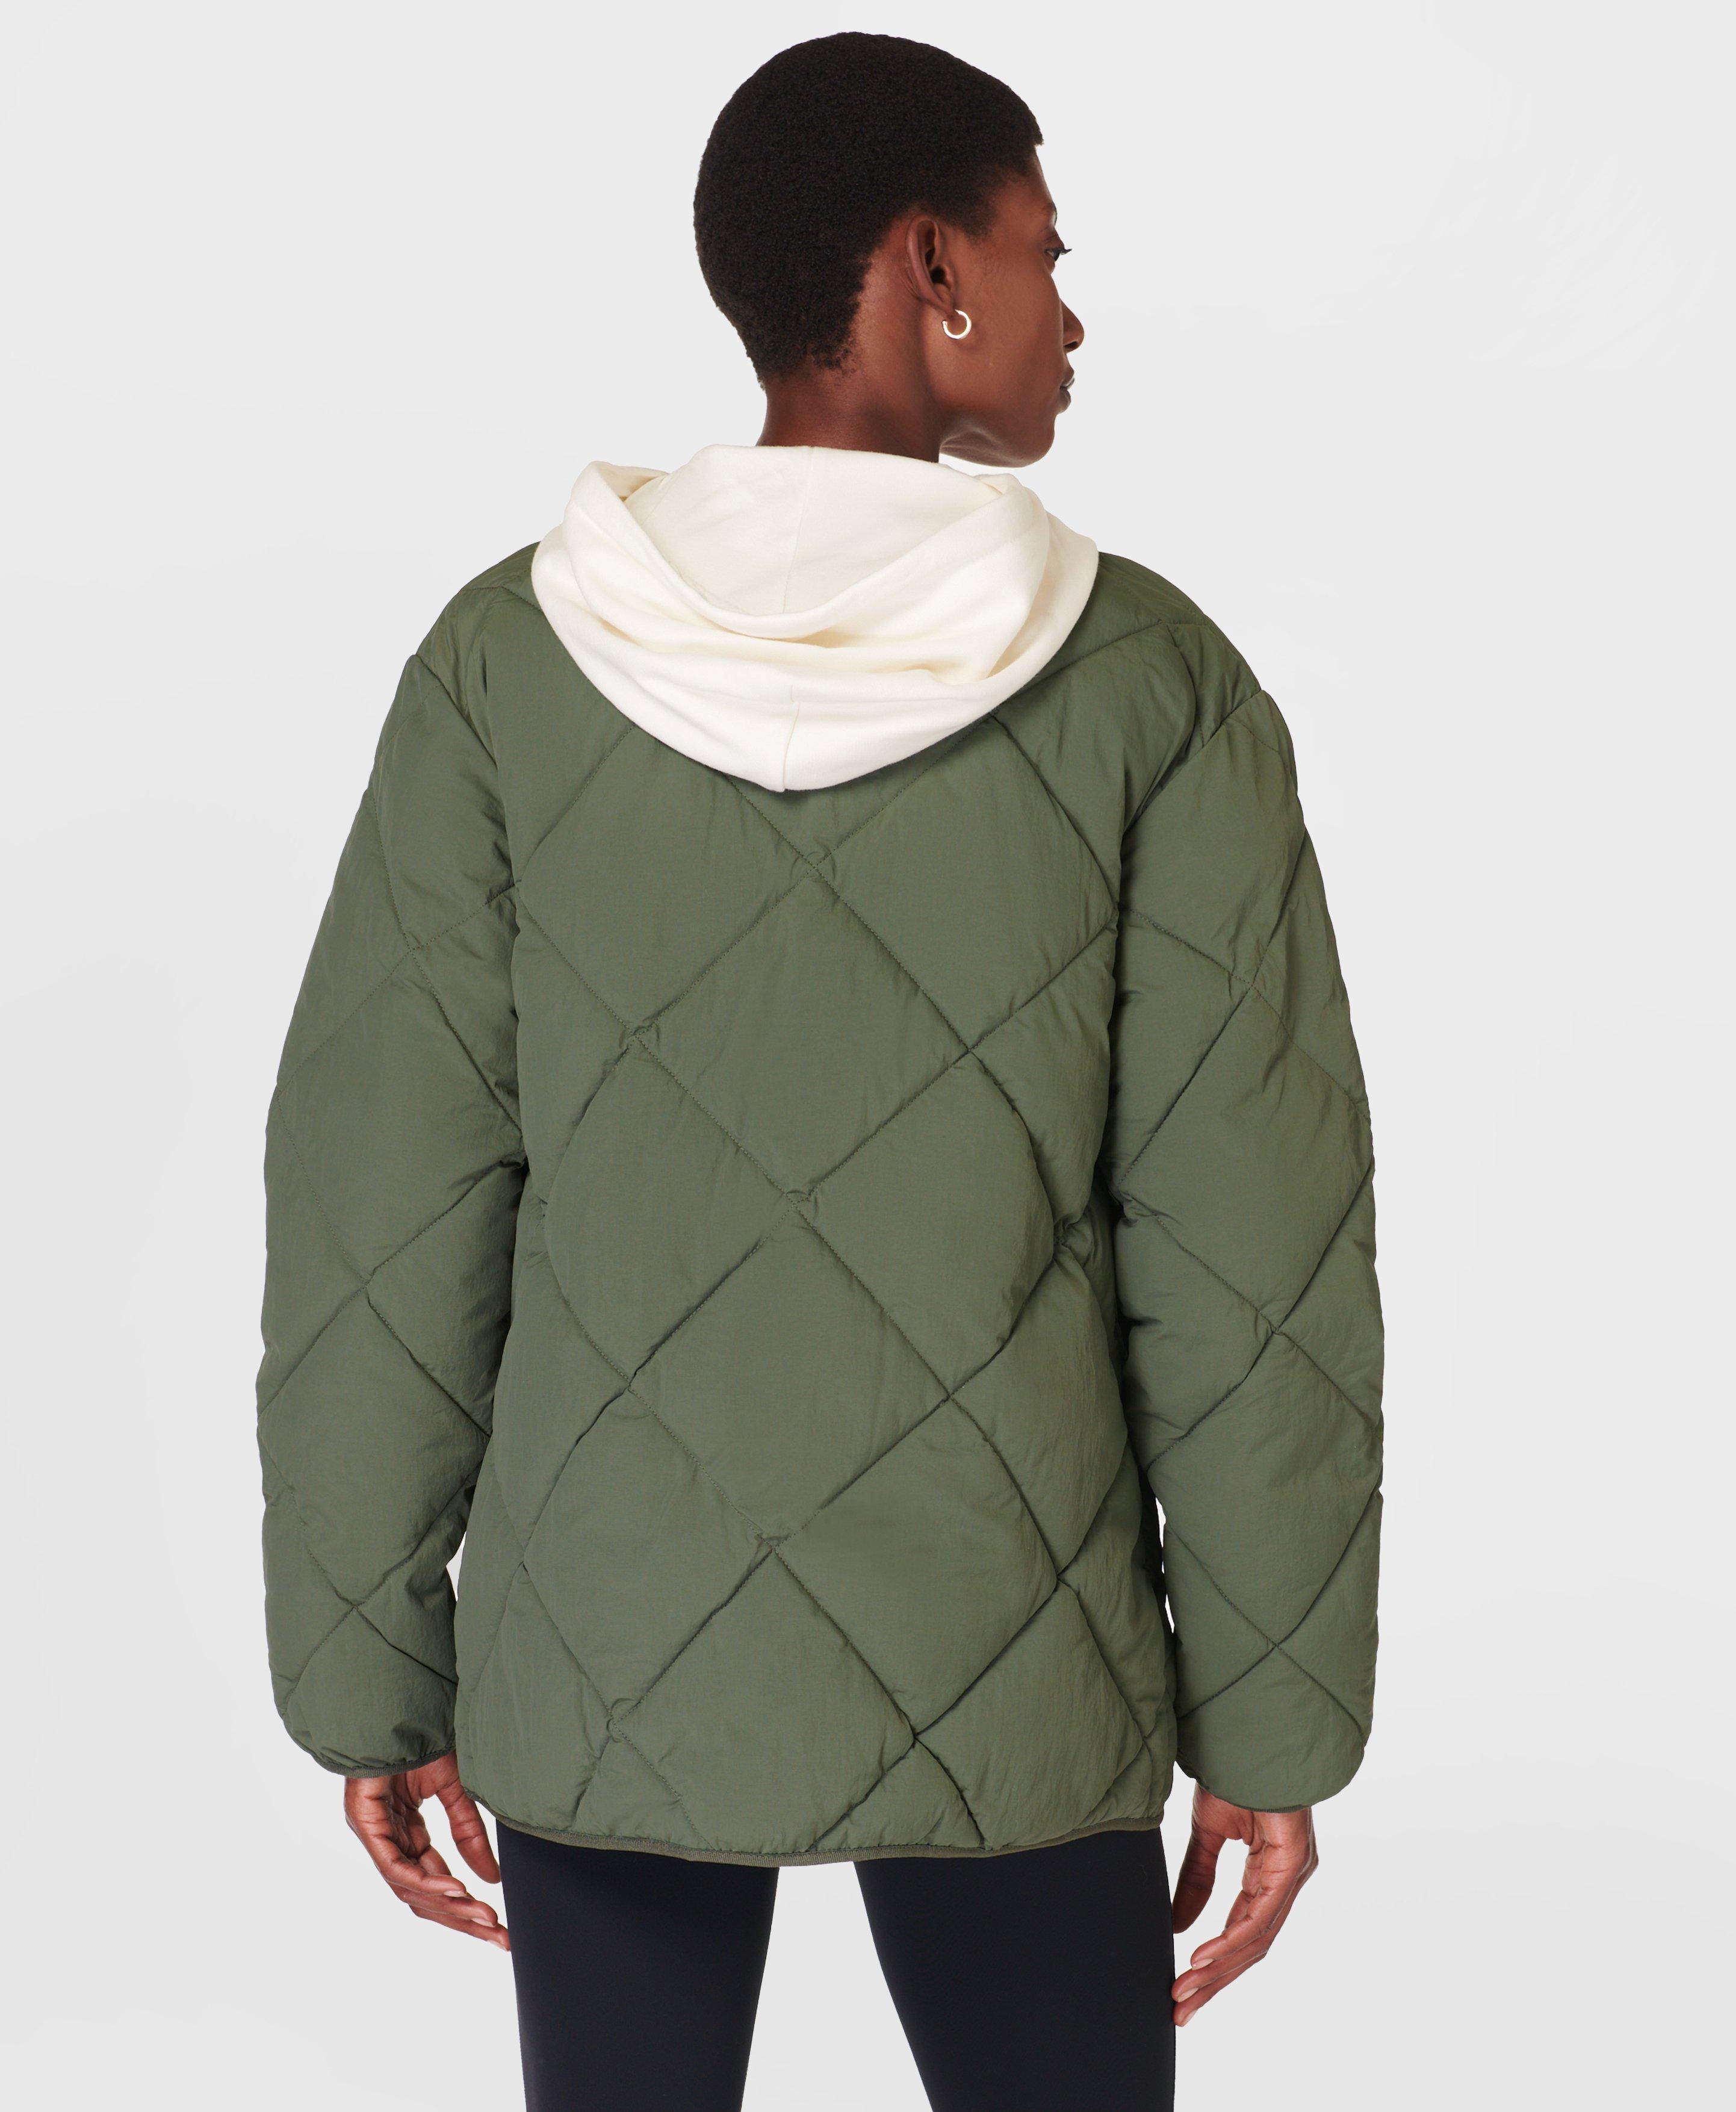 Sweaty Betty on The Move Quilted Jacket, Green, Women's M